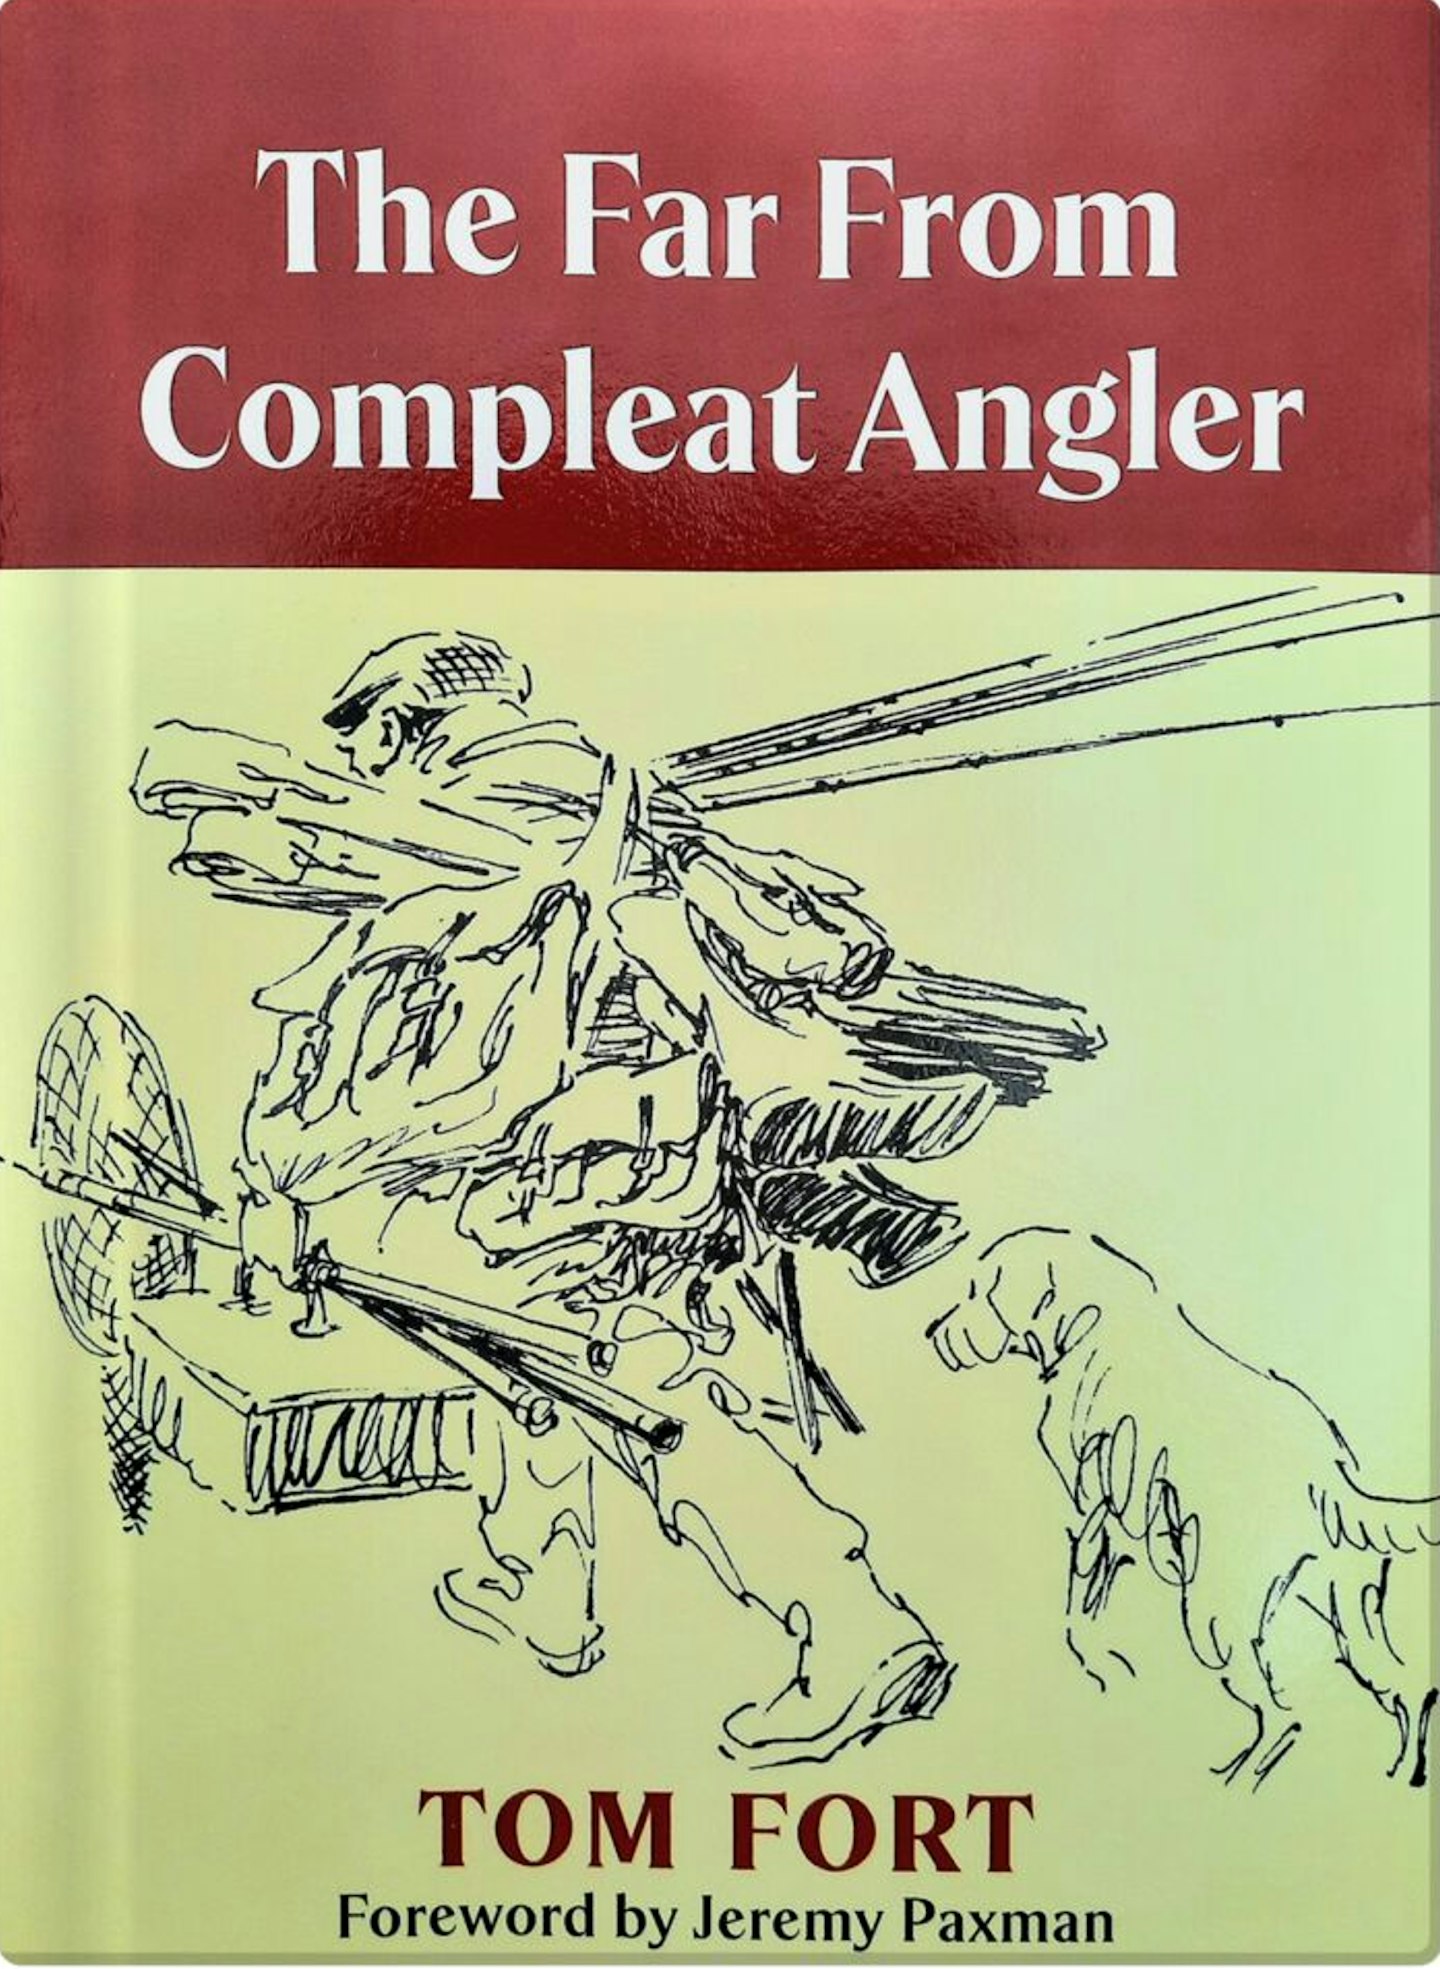 Great angling books